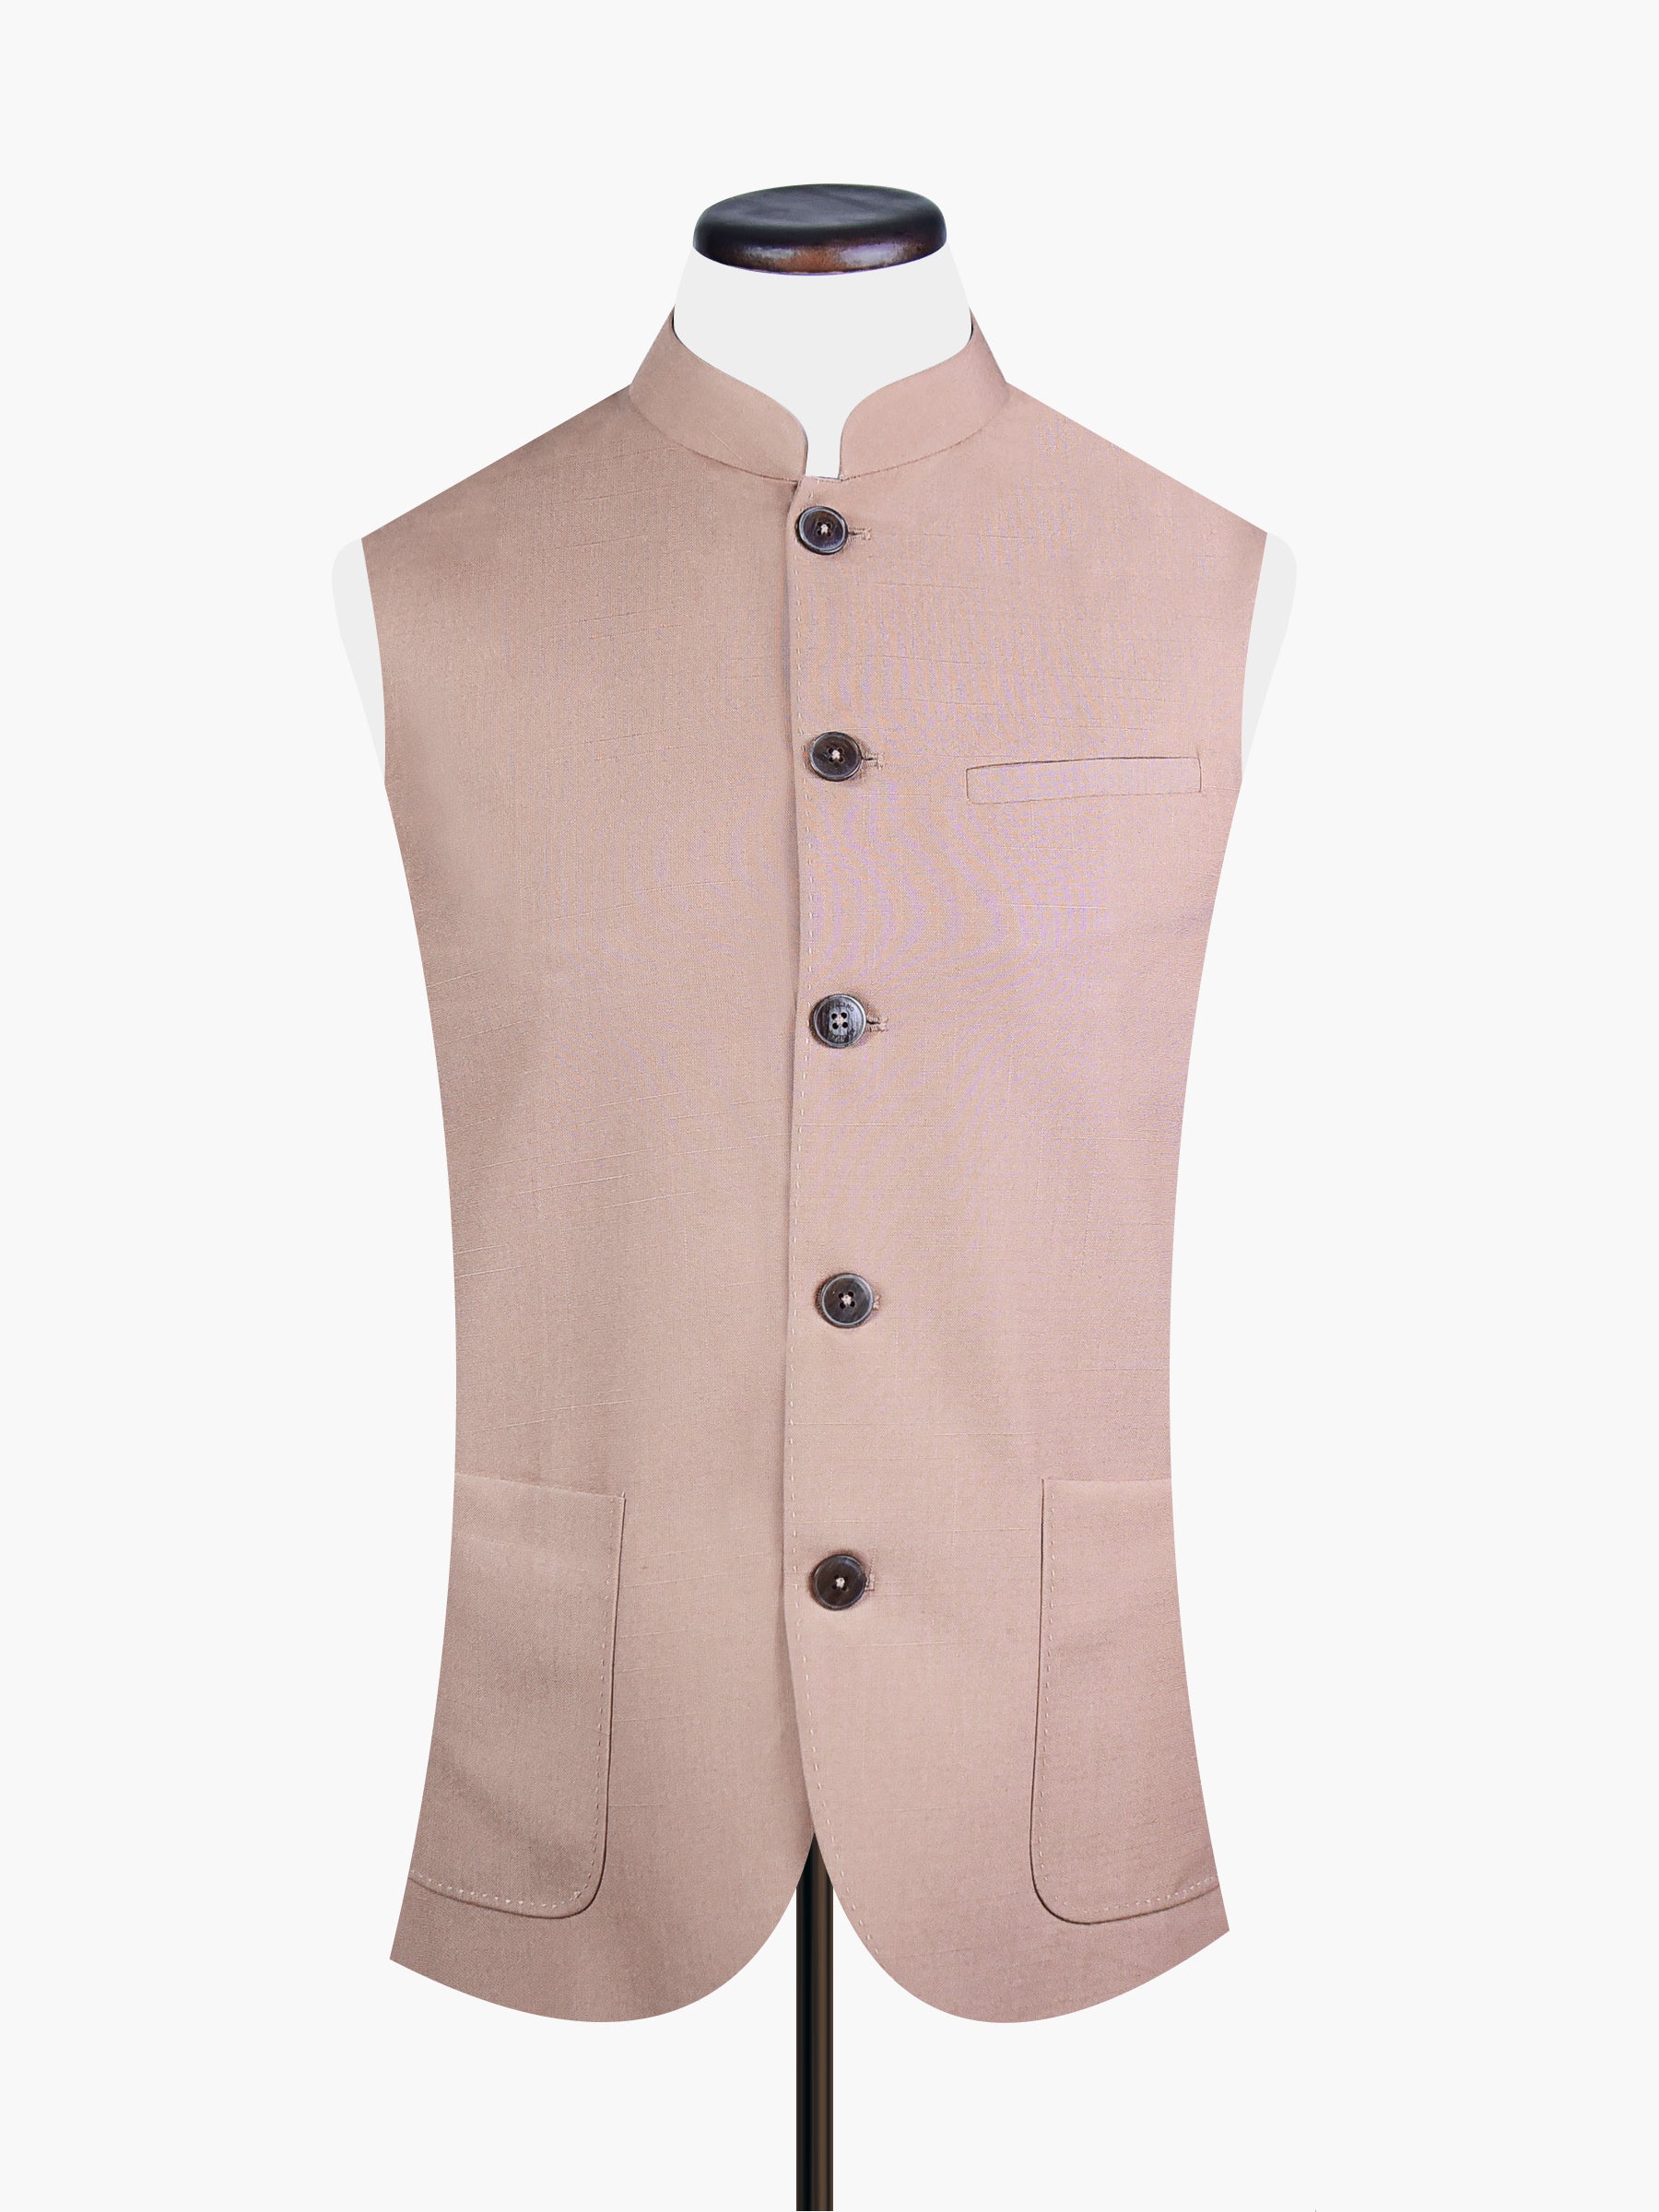 Fawn Brown Formal Textured Waistcoat